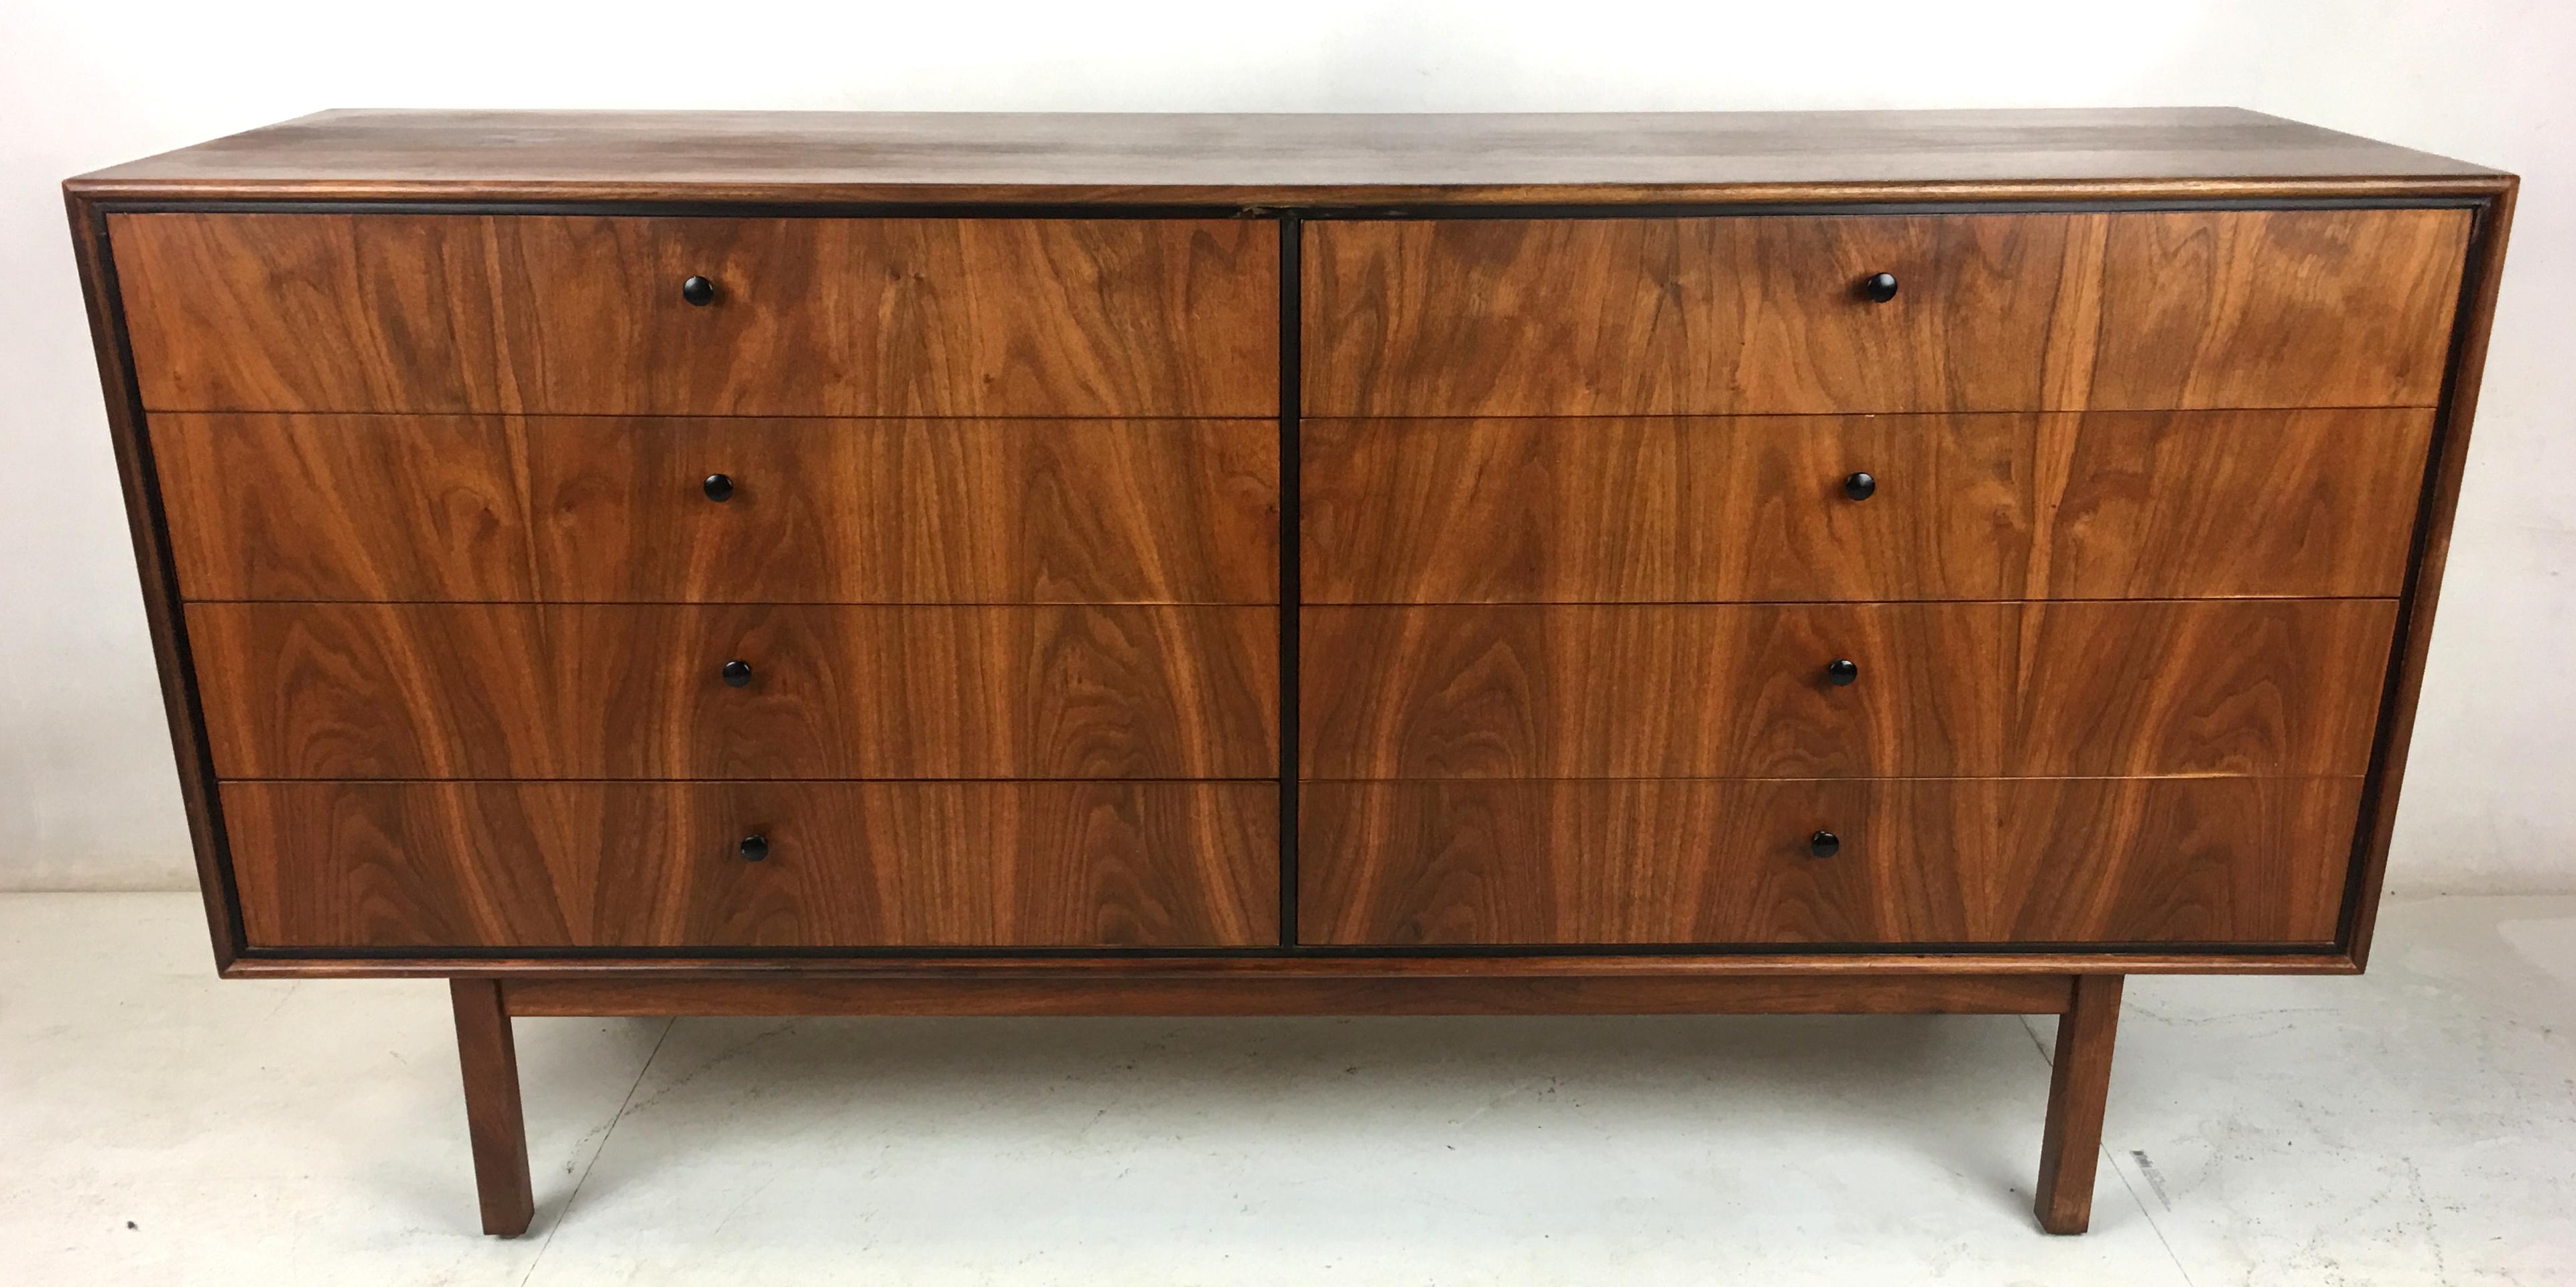 Handsome eight-drawer dresser of vibrant matched-grain walnut with ebony trim by Jack Cartwright for Founders. This small and coveted collection of case goods is quite rare and desirable, especially in such beautiful original condition. Legs have